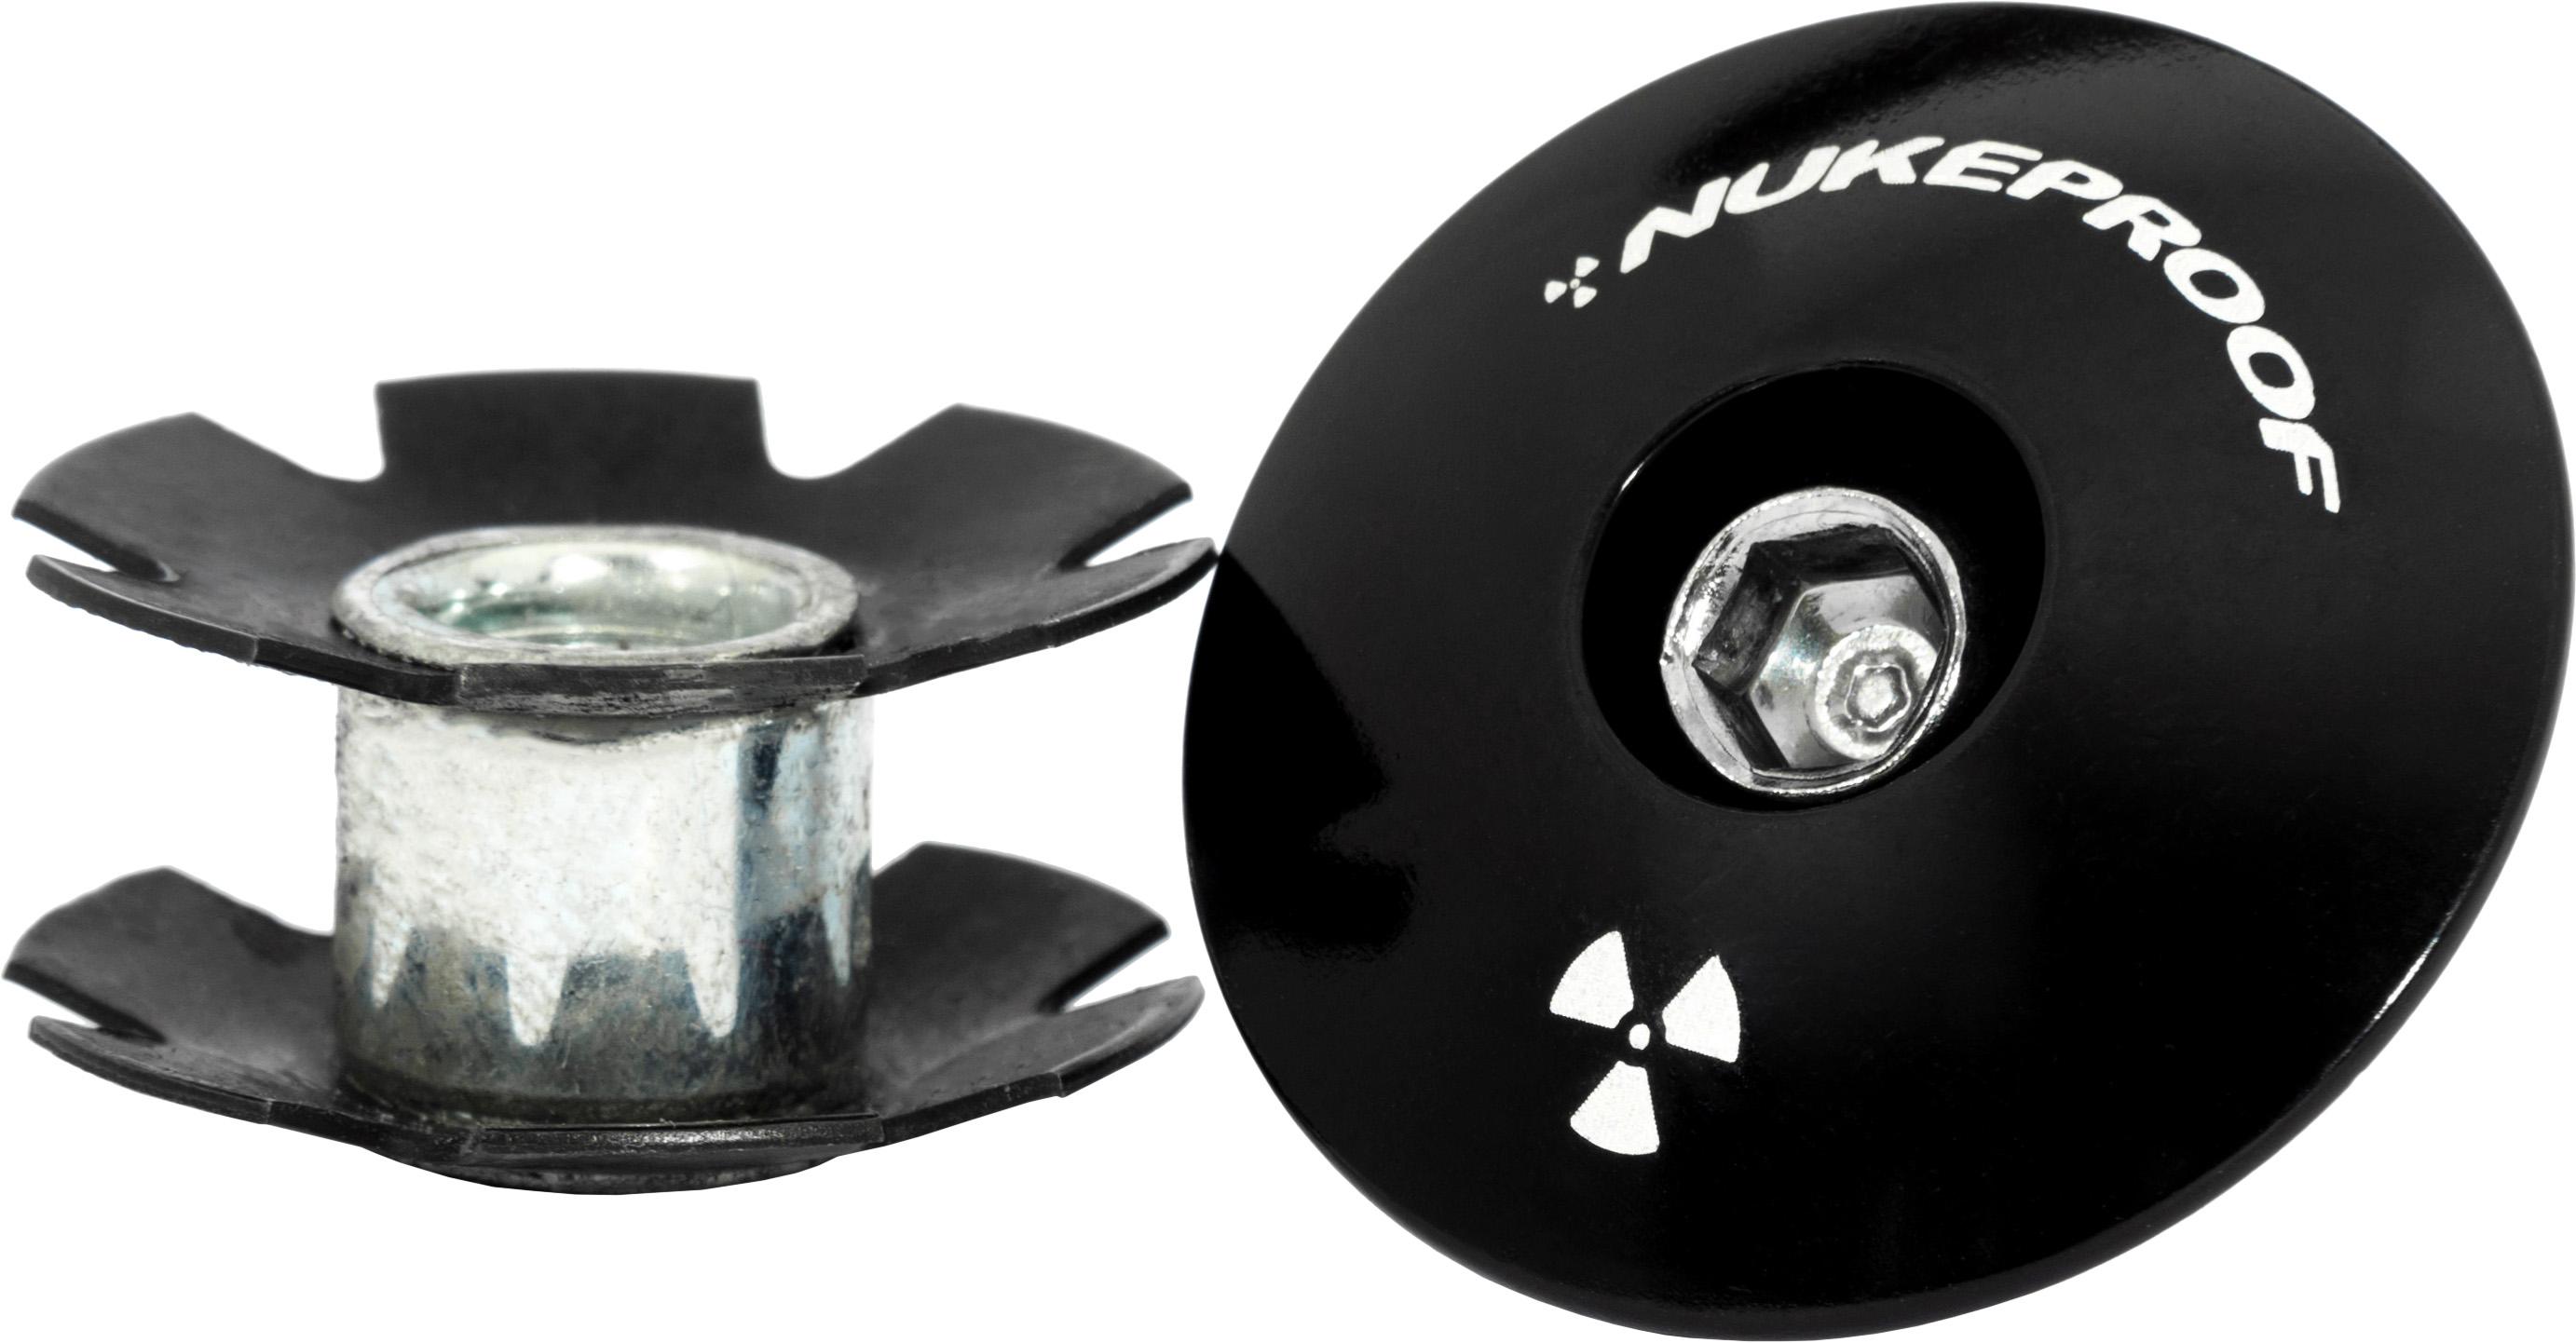 Nukeproof Top Cap And Star Nut - Black